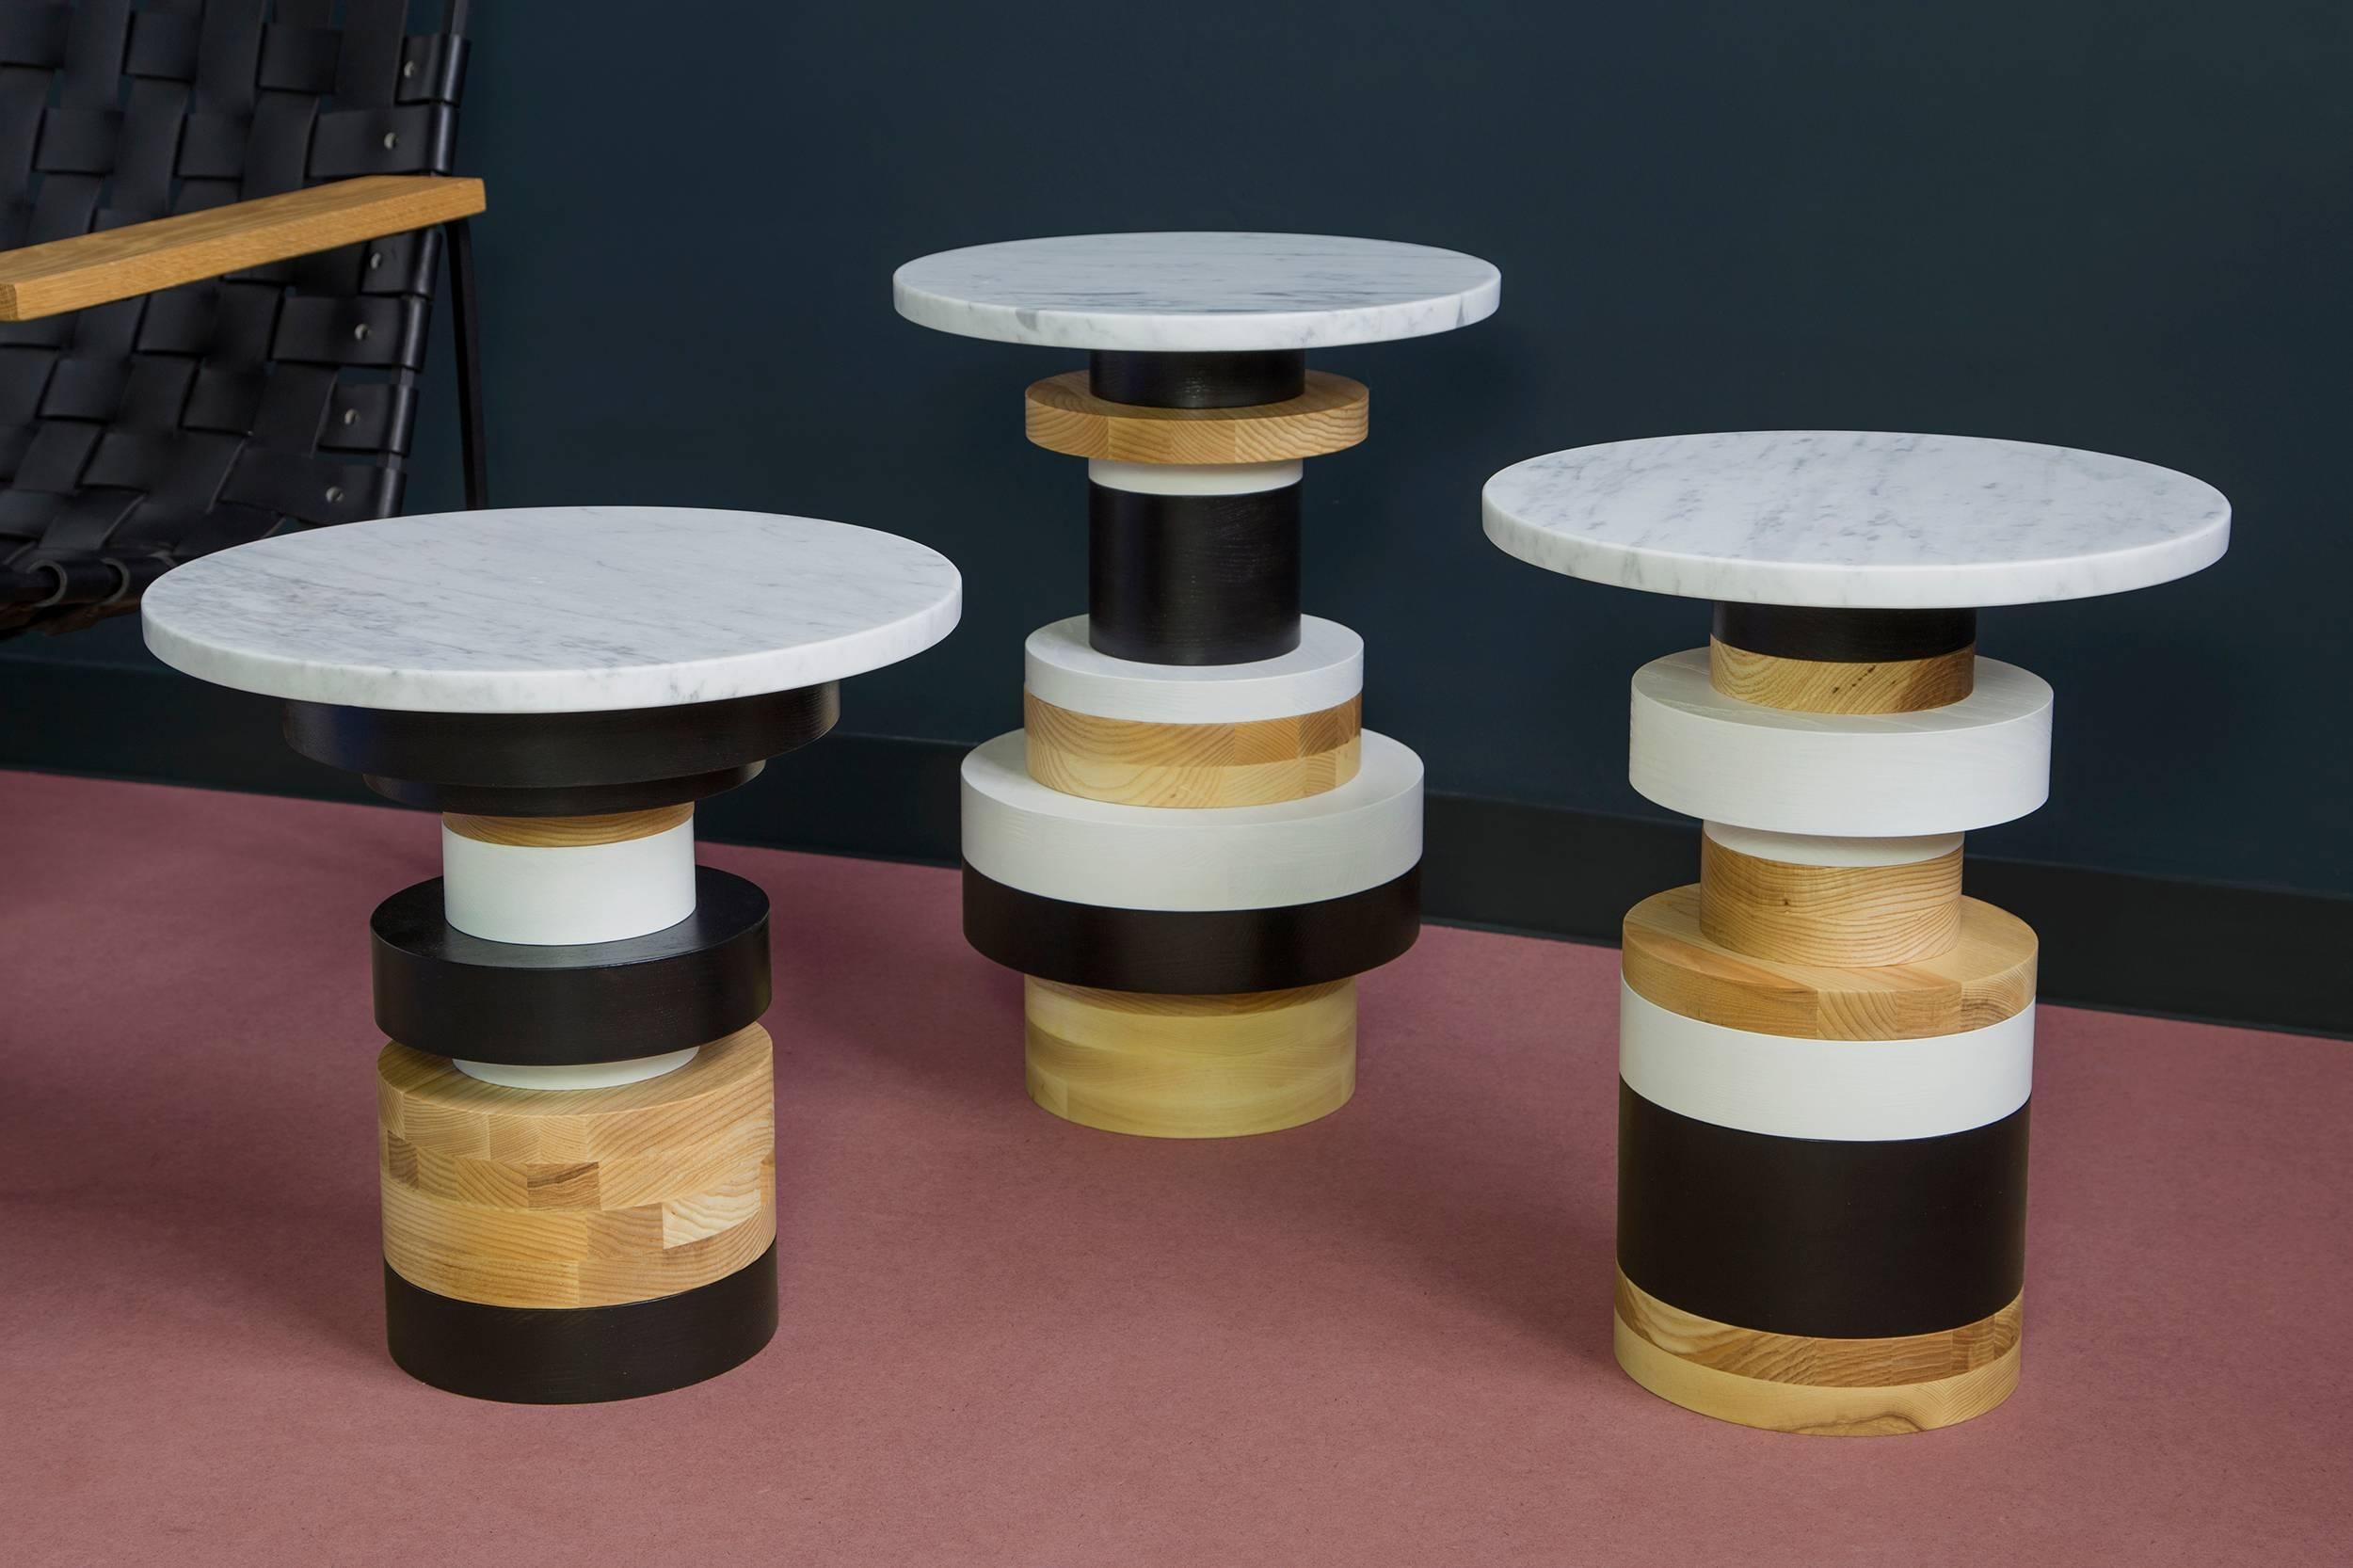 The Sottsass-inspired “Sass Tables” are simple, sculptural accents for any interior space. Made from stacked wooden bases and a honed marble top, Sass tables are perfect individually or clustered. Measures: 18 inches tall with 18 inch marble top.